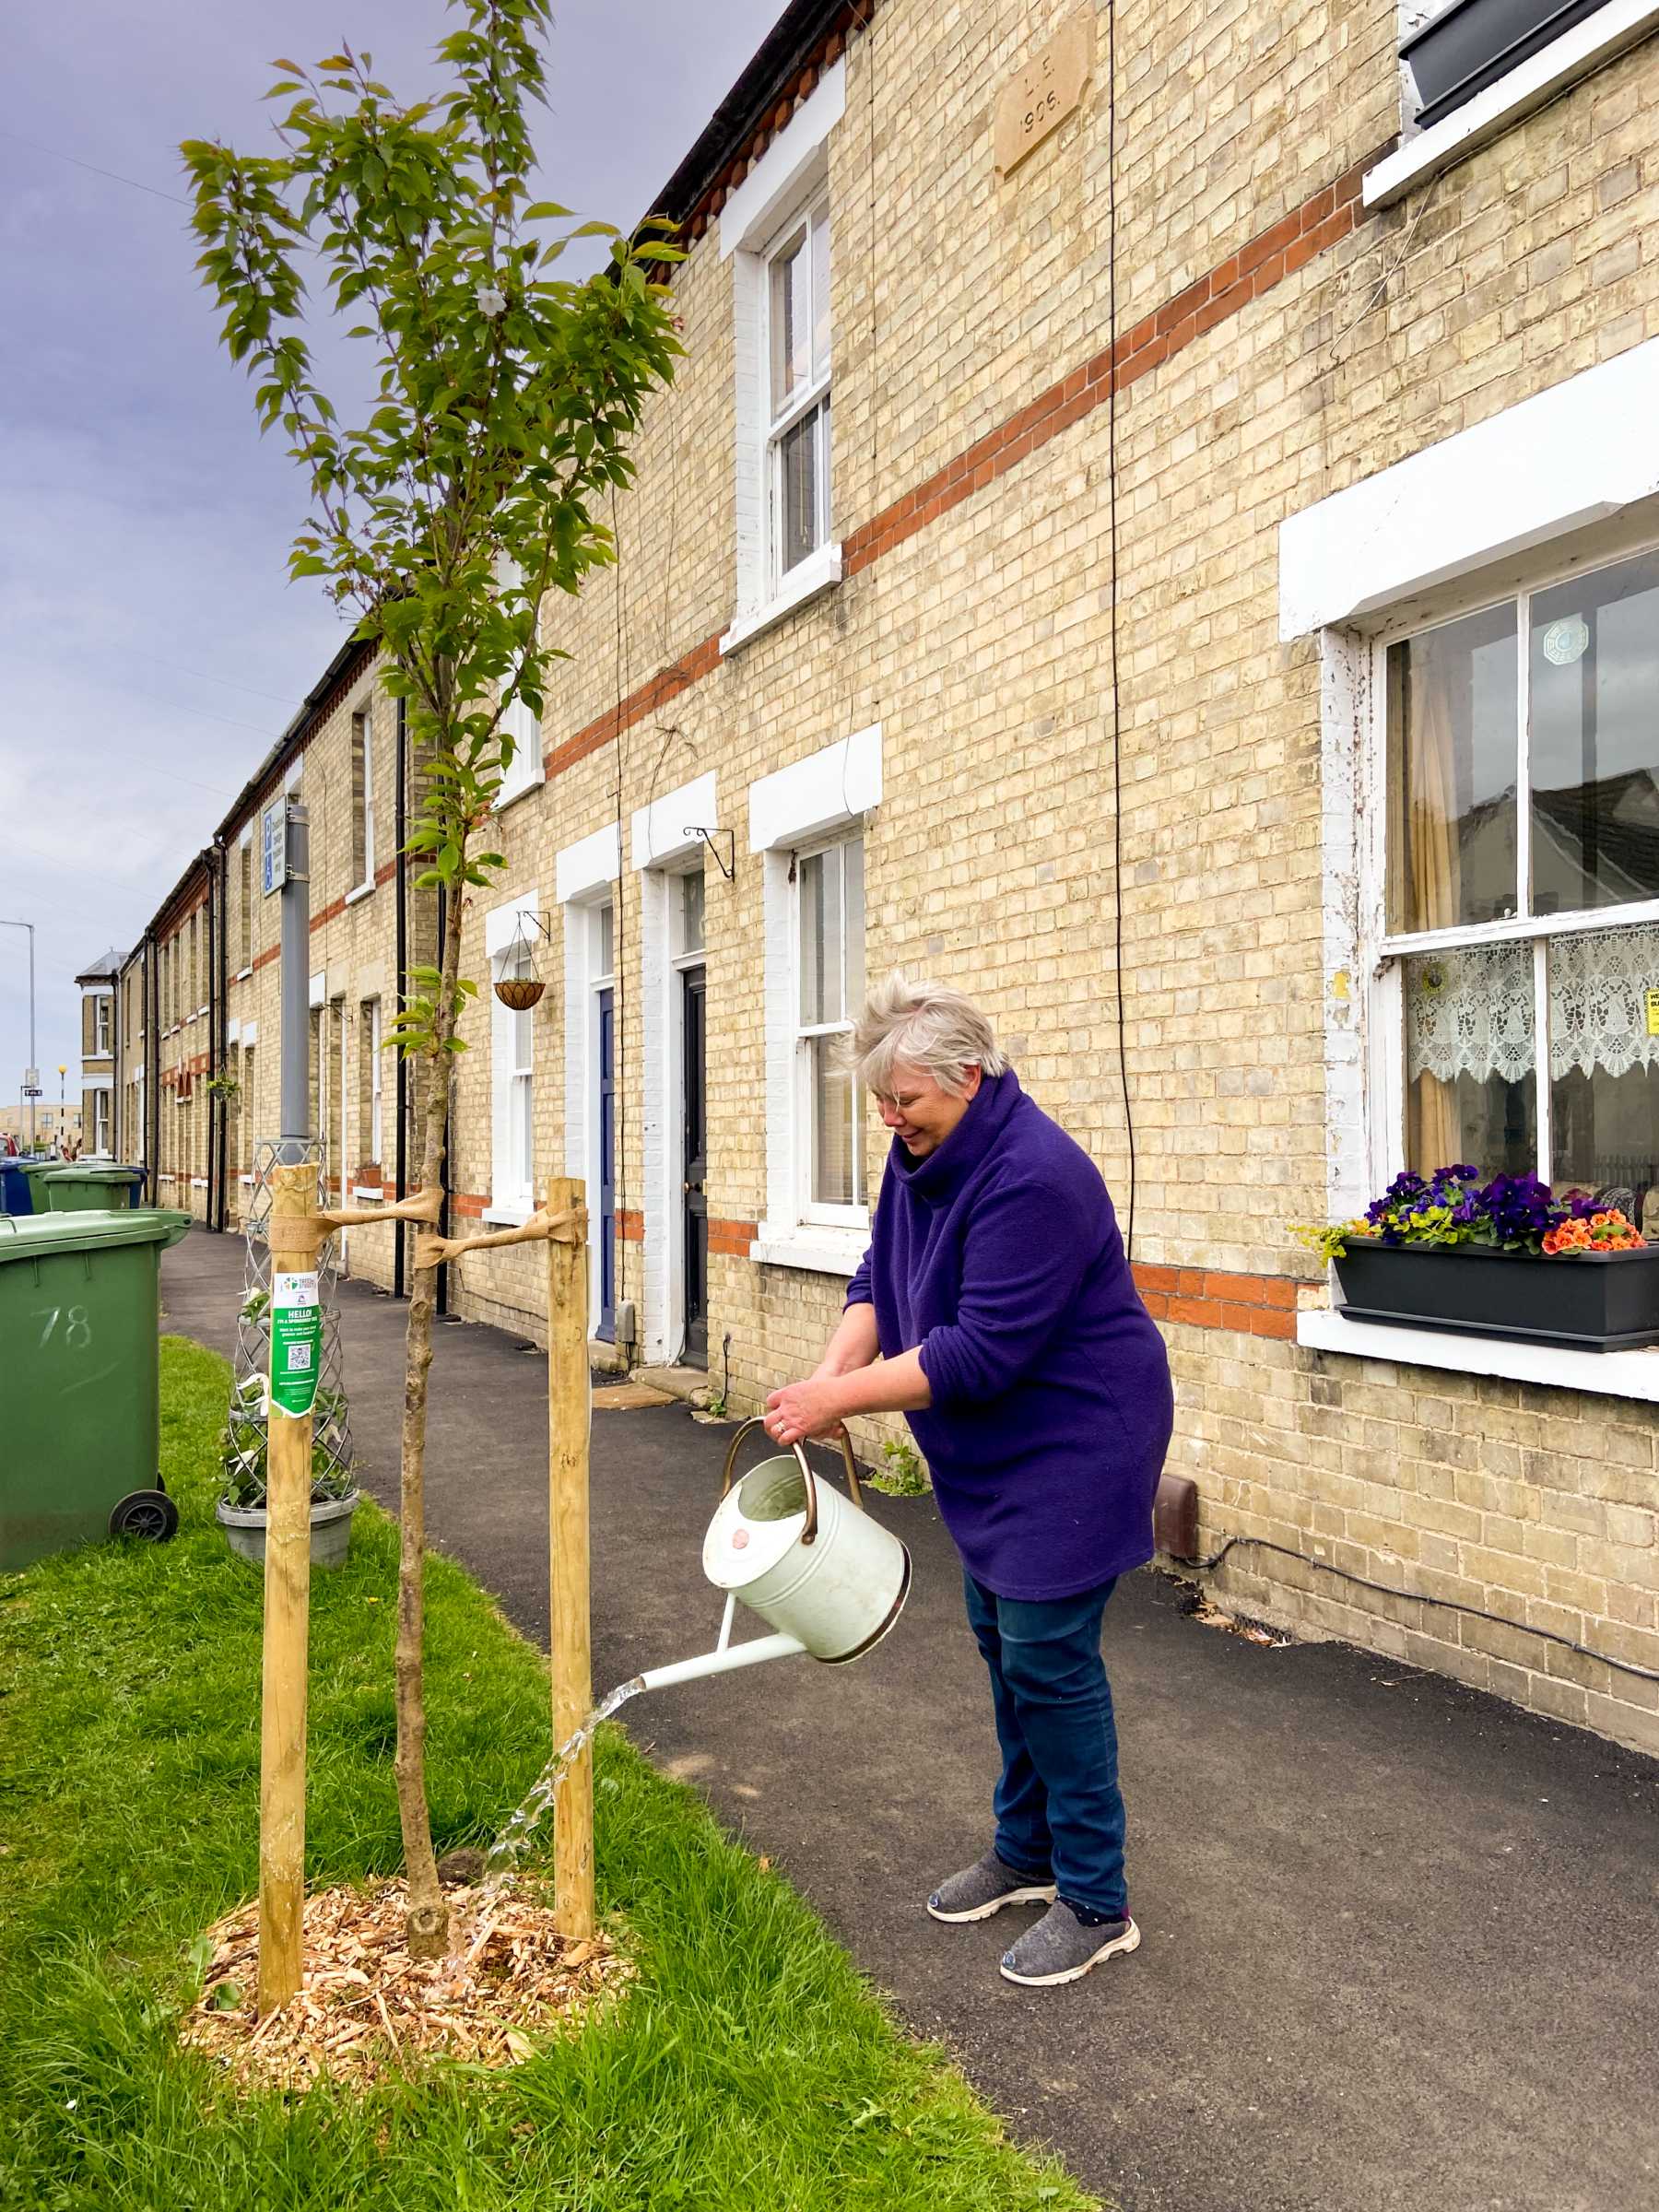 Dilly watering her street tree